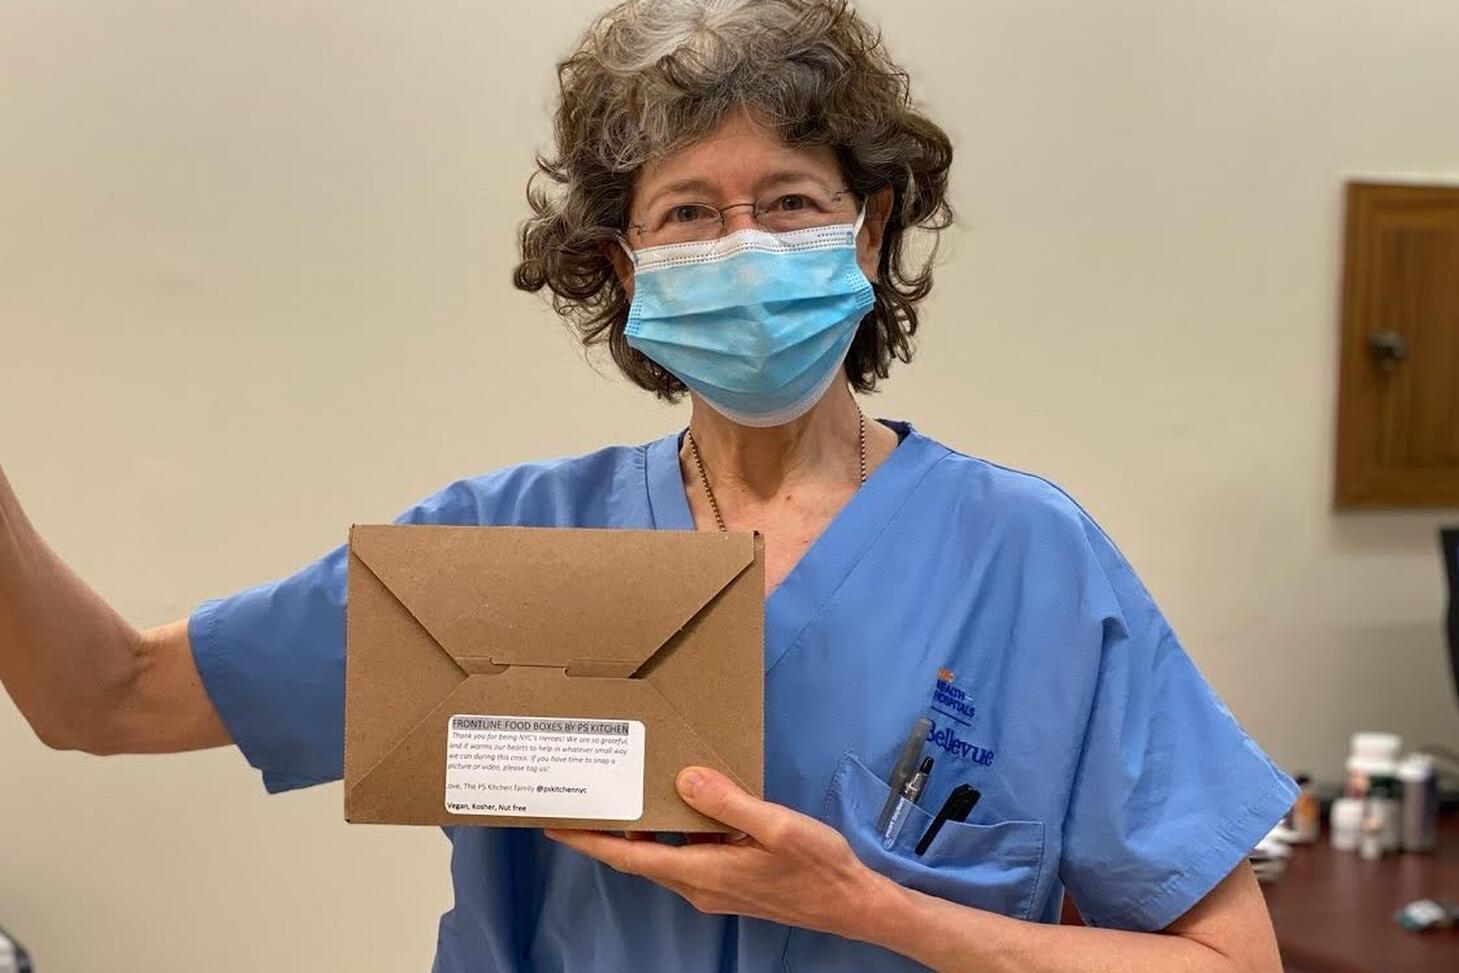 A healthcare worker holding a boxed meal wearing a surgical mask giving a thumbs up.